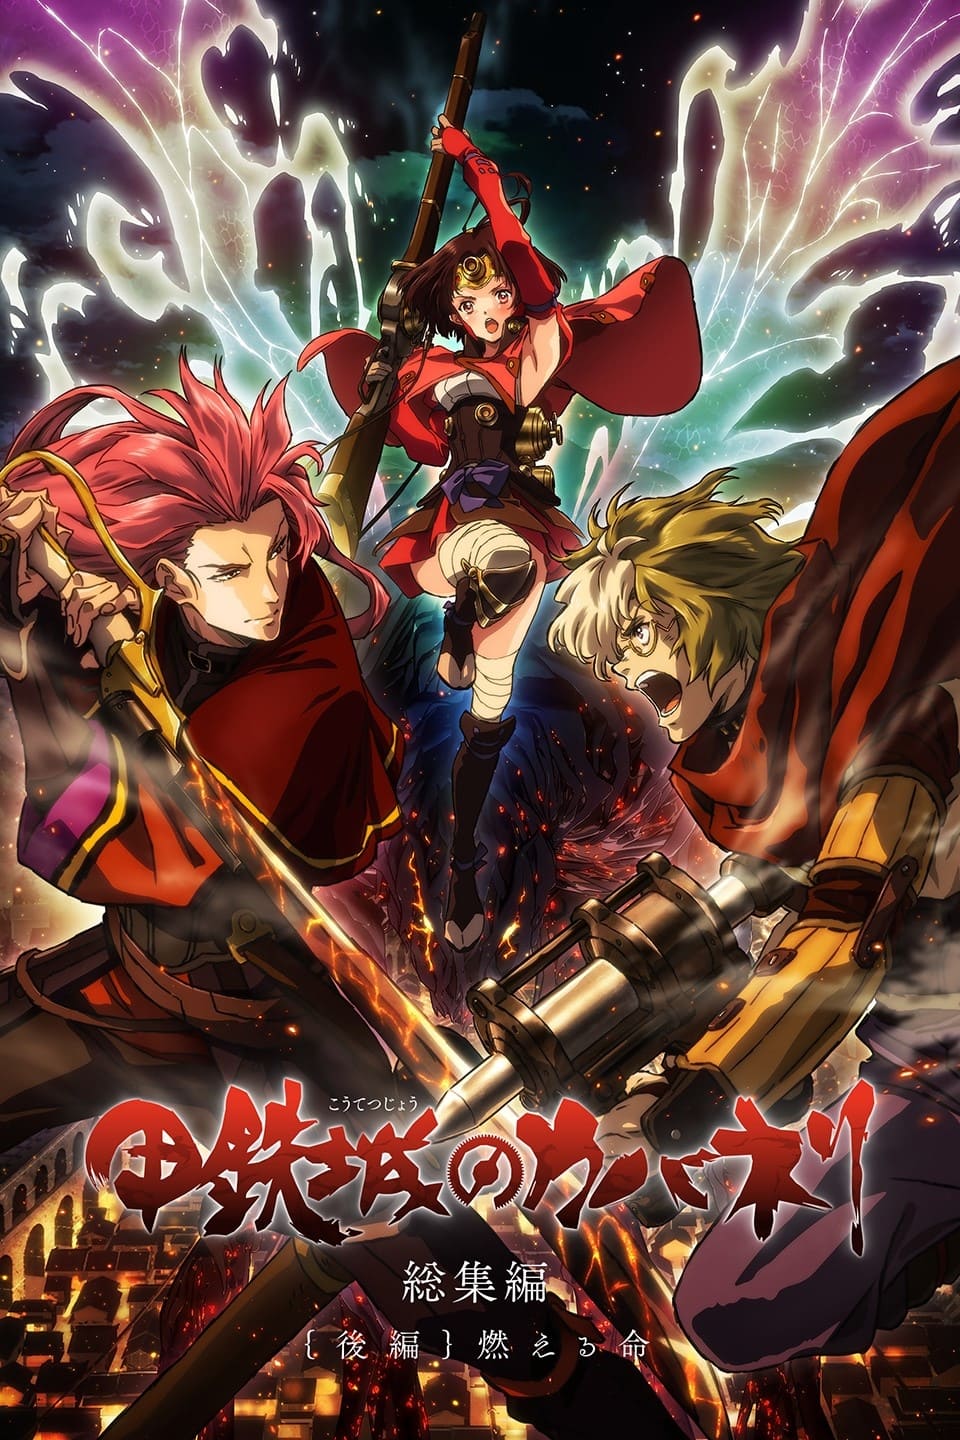 Kabaneri of the Iron Fortress Film 2 - Life That Burns